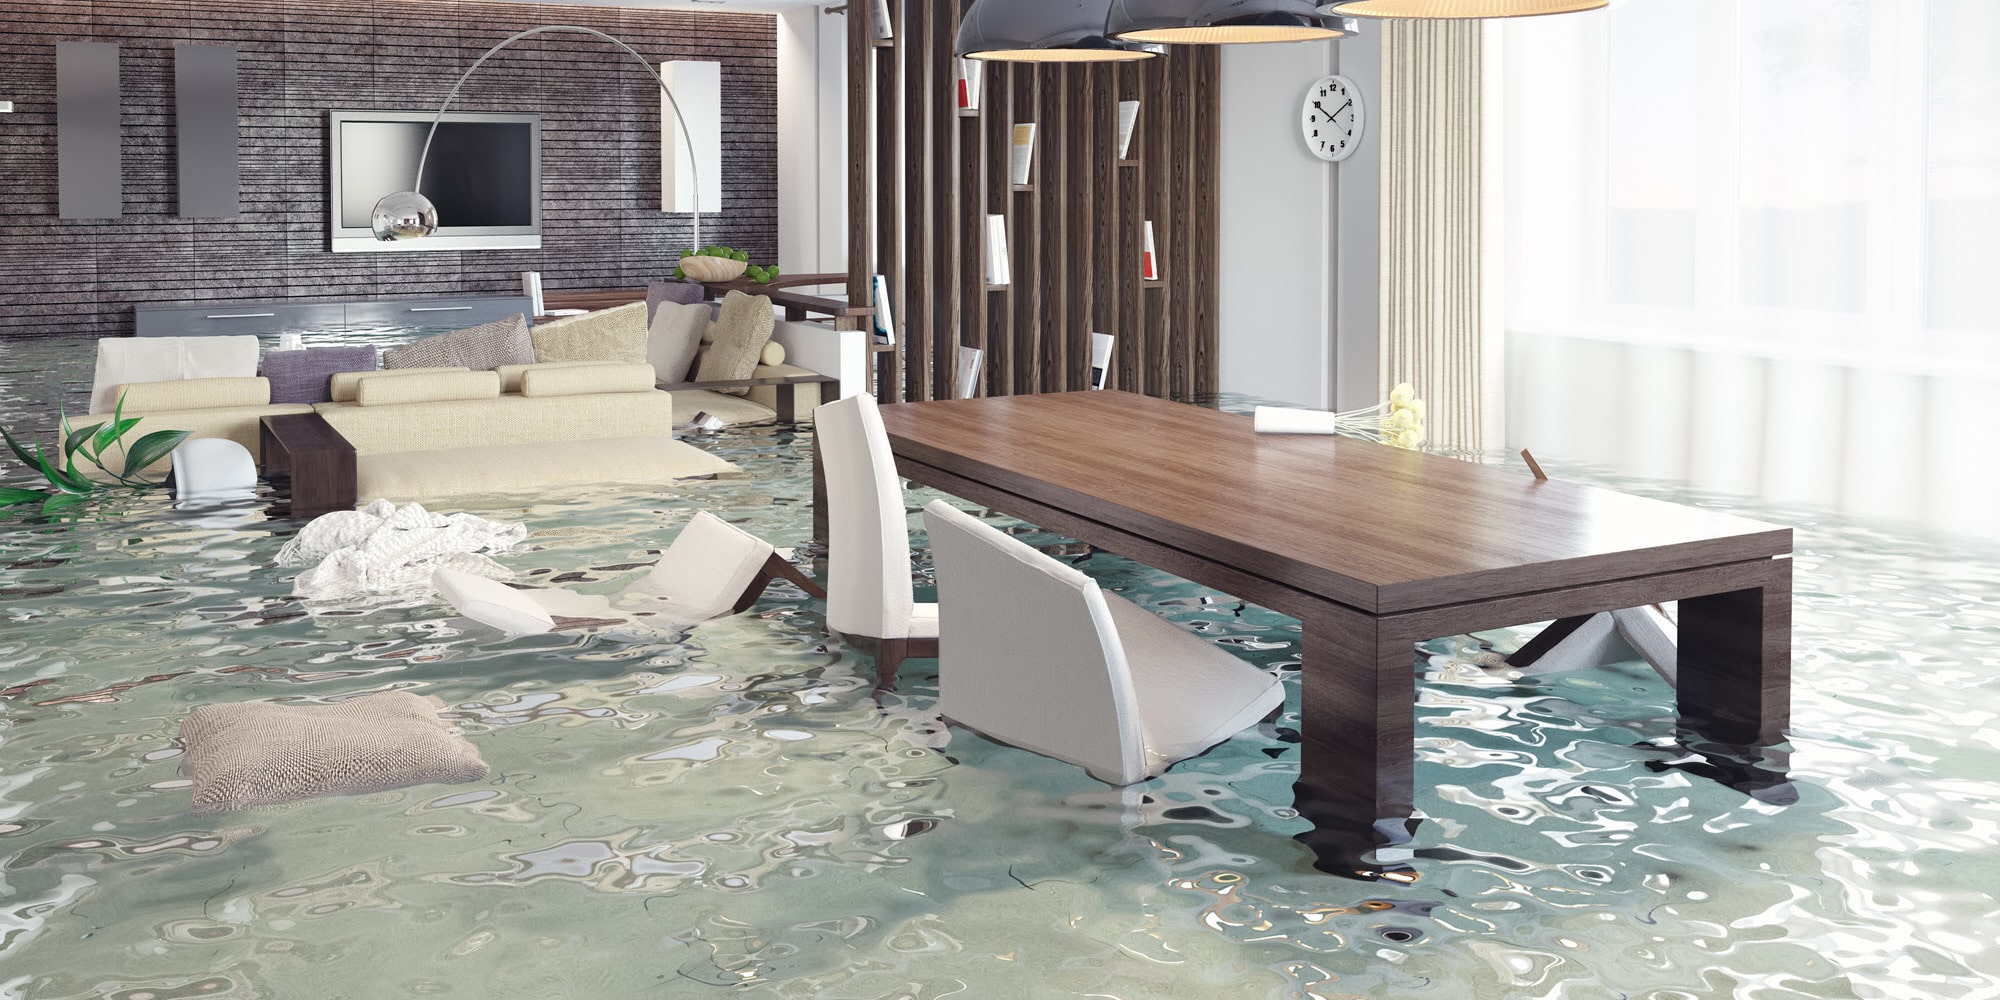 Water Damage Restoration and Mold Removal Experts in Castaic, California​